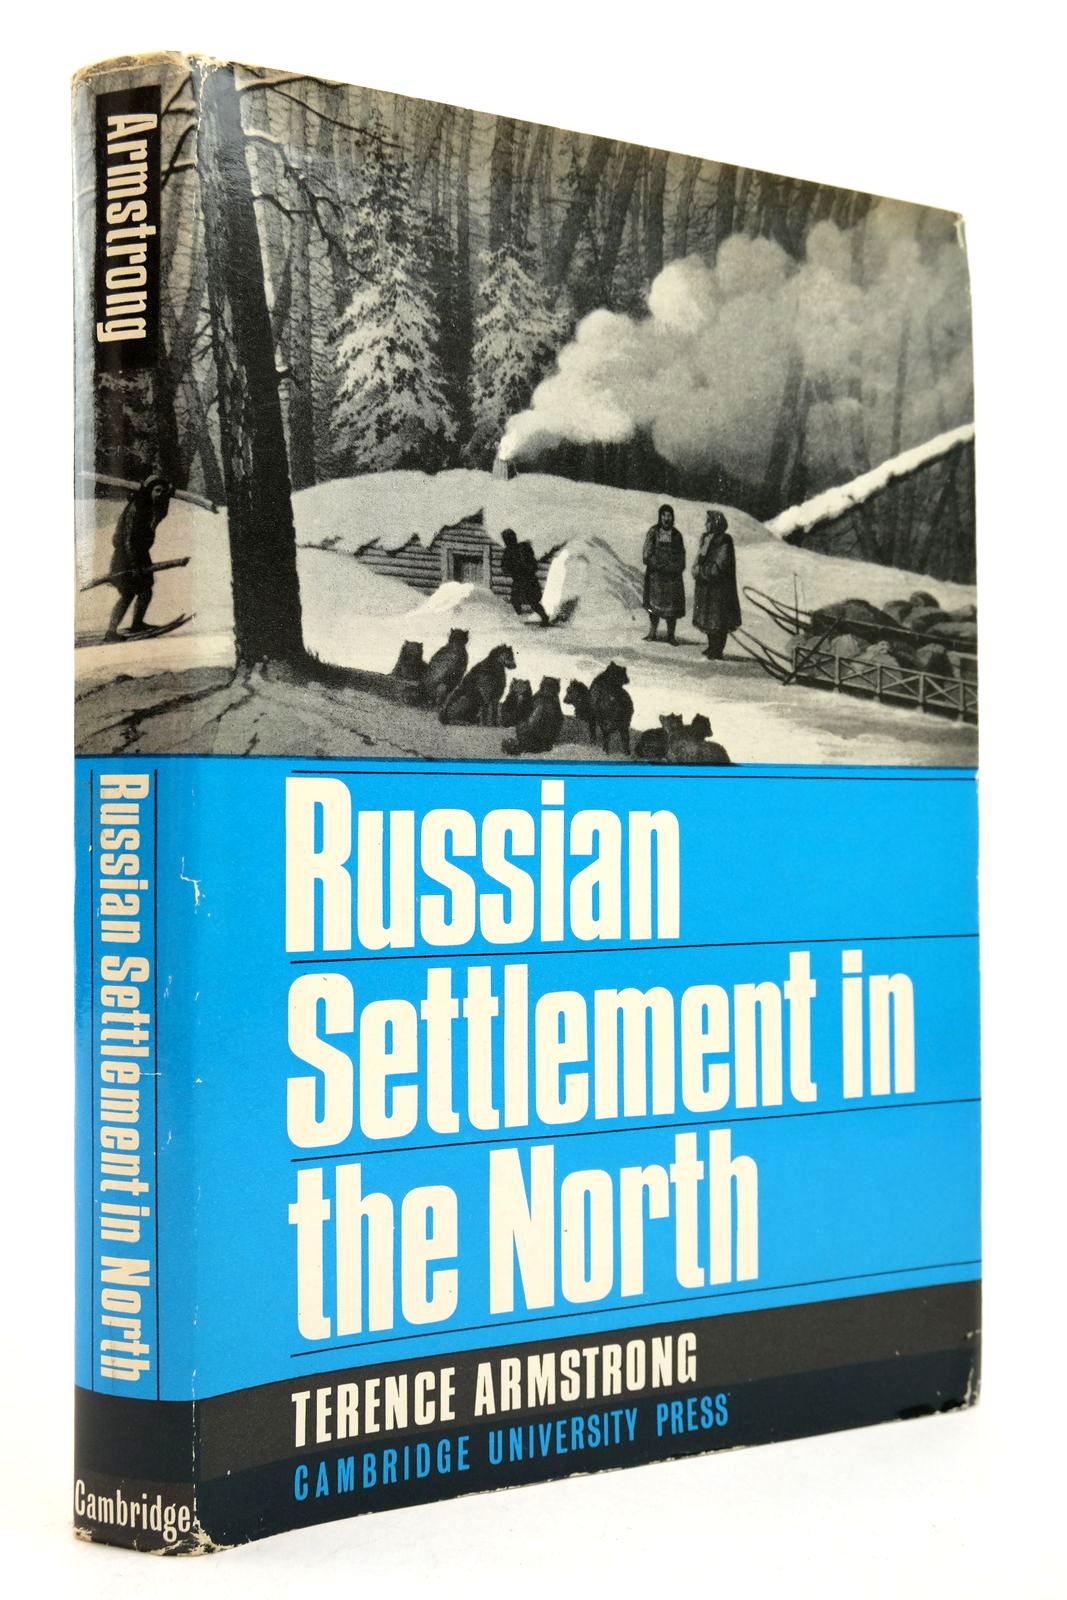 Photo of RUSSIAN SETTLEMENT IN THE NORTH written by Armstrong, Terence published by Cambridge University Press (STOCK CODE: 2139441)  for sale by Stella & Rose's Books